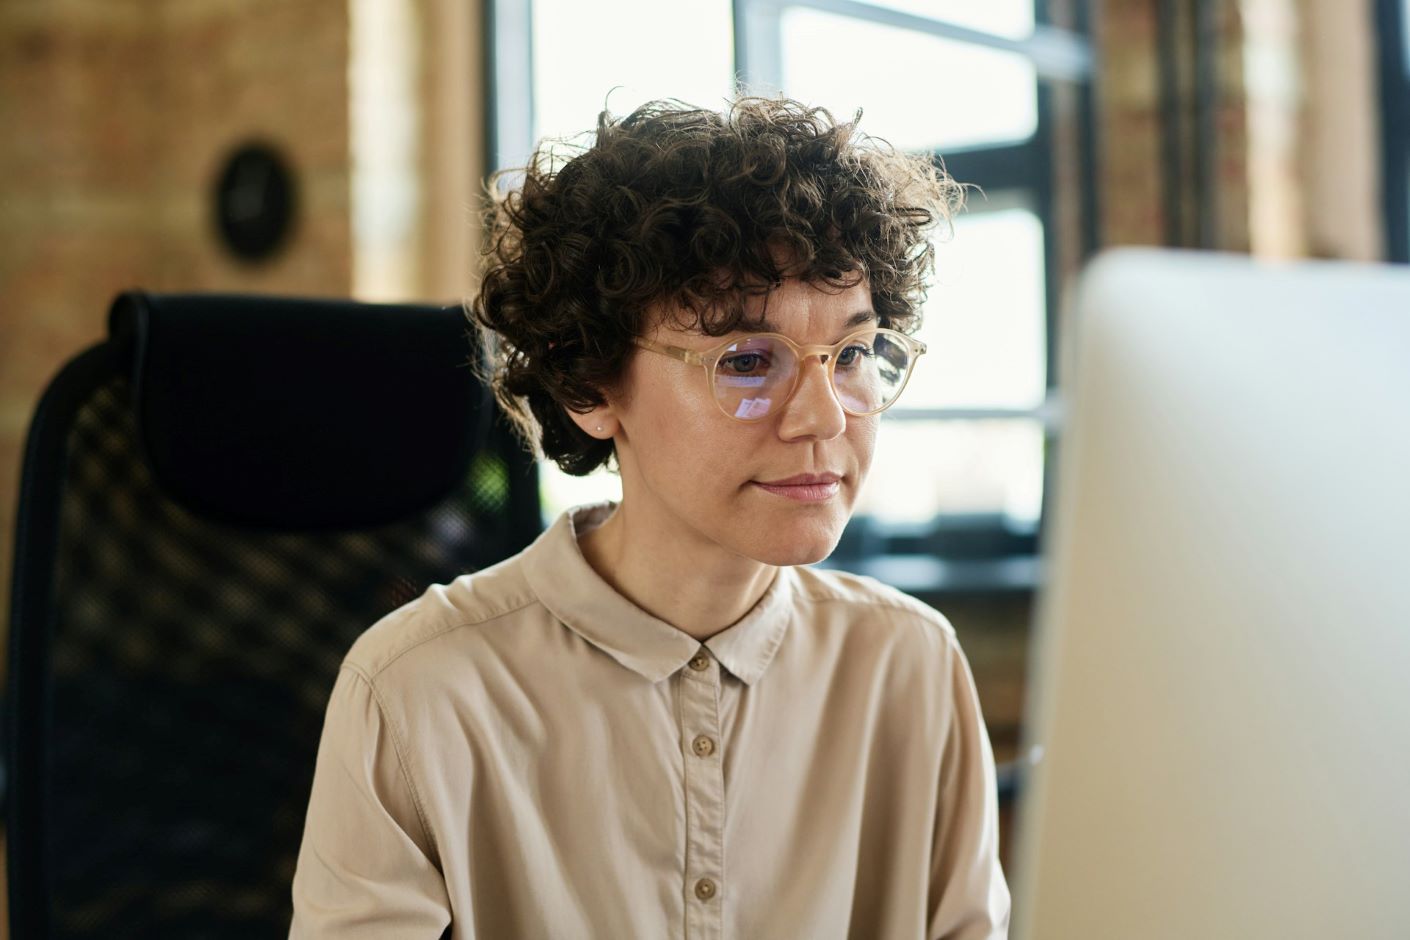 Woman with curly hair and glasses looking at laptop